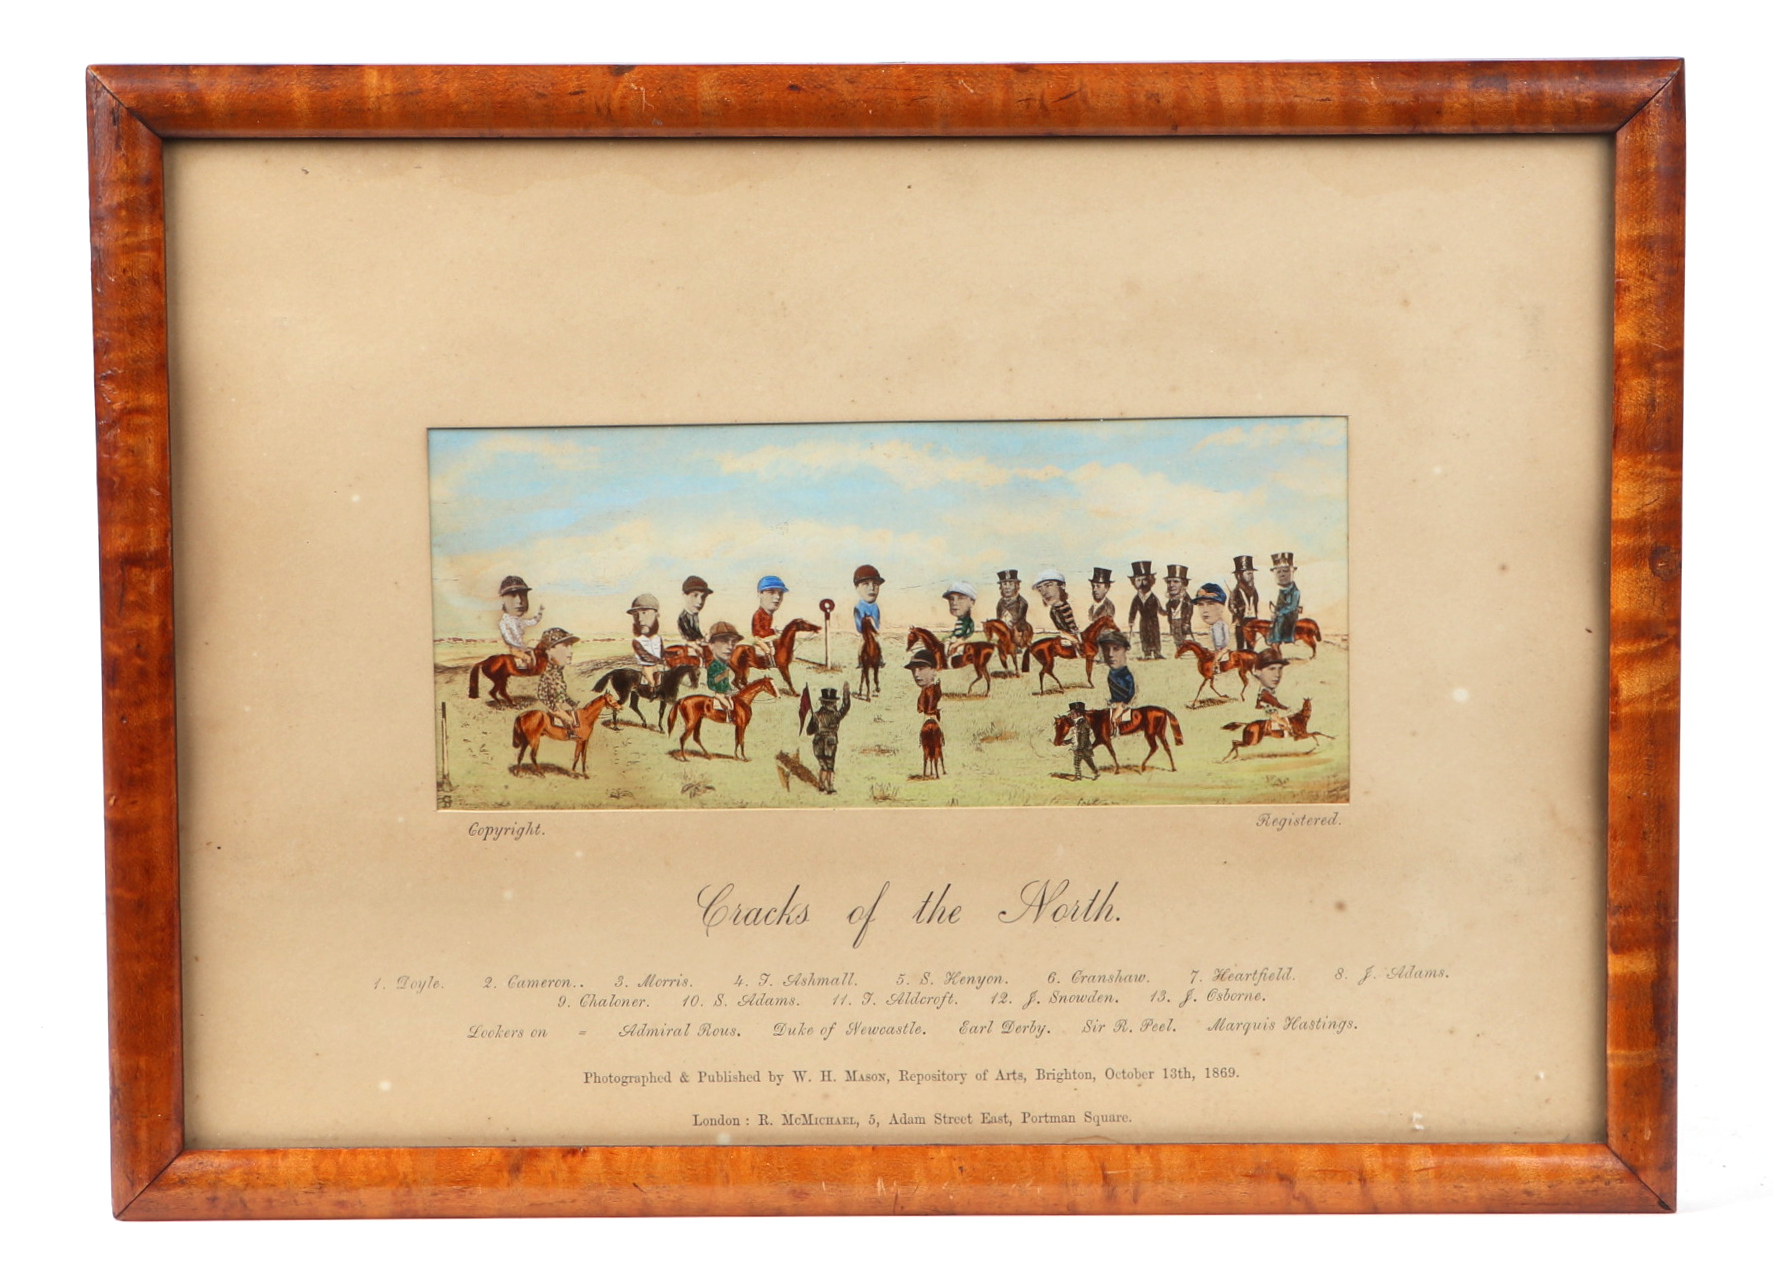 Horse racing interest. A coloured horse racing print, "Cracks of the North", photographed and - Image 2 of 5